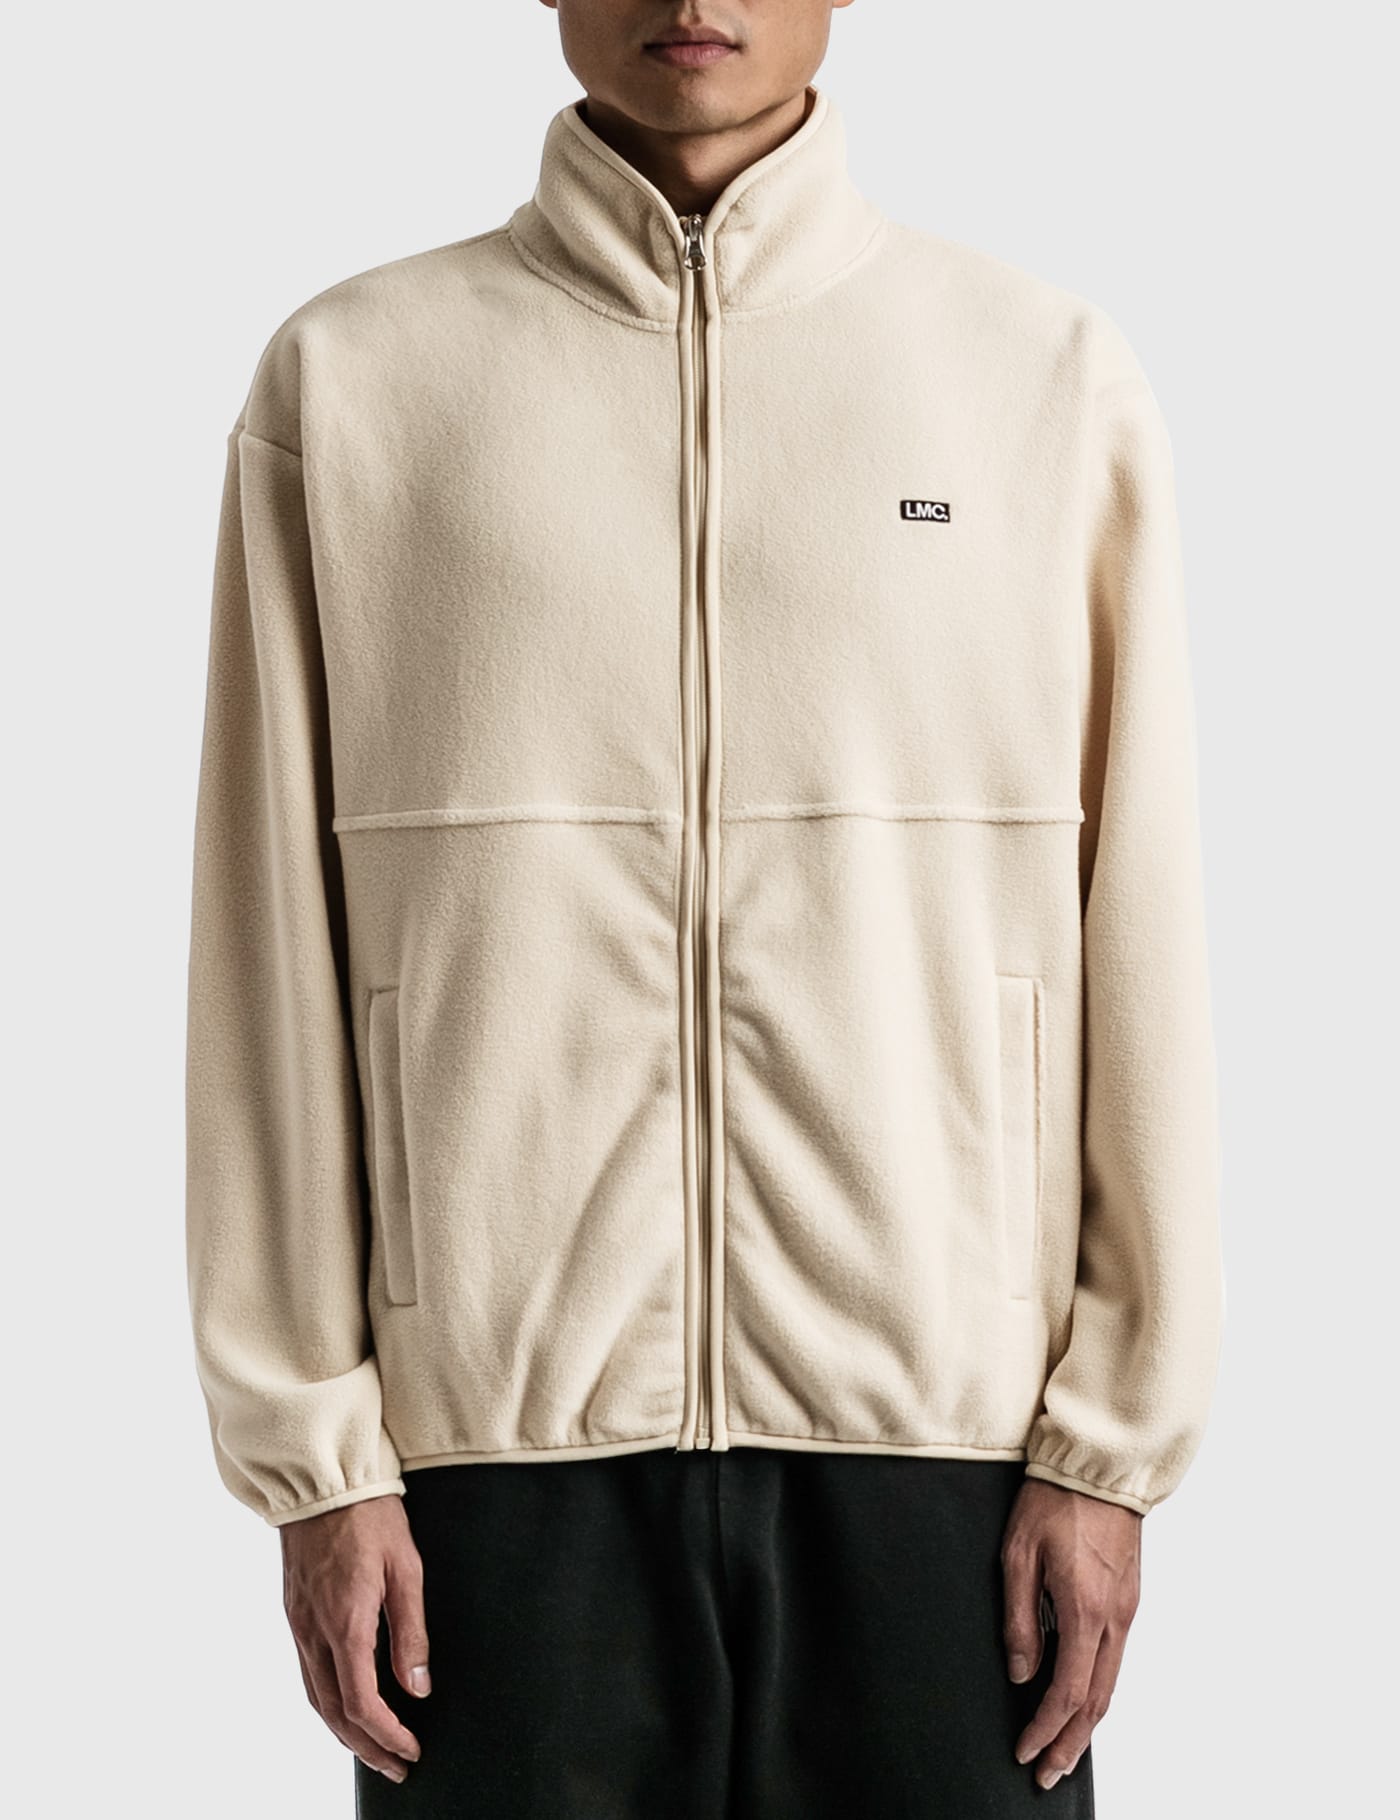 LMC - Fleece Team Jacket | HBX - Globally Curated Fashion and Lifestyle by  Hypebeast